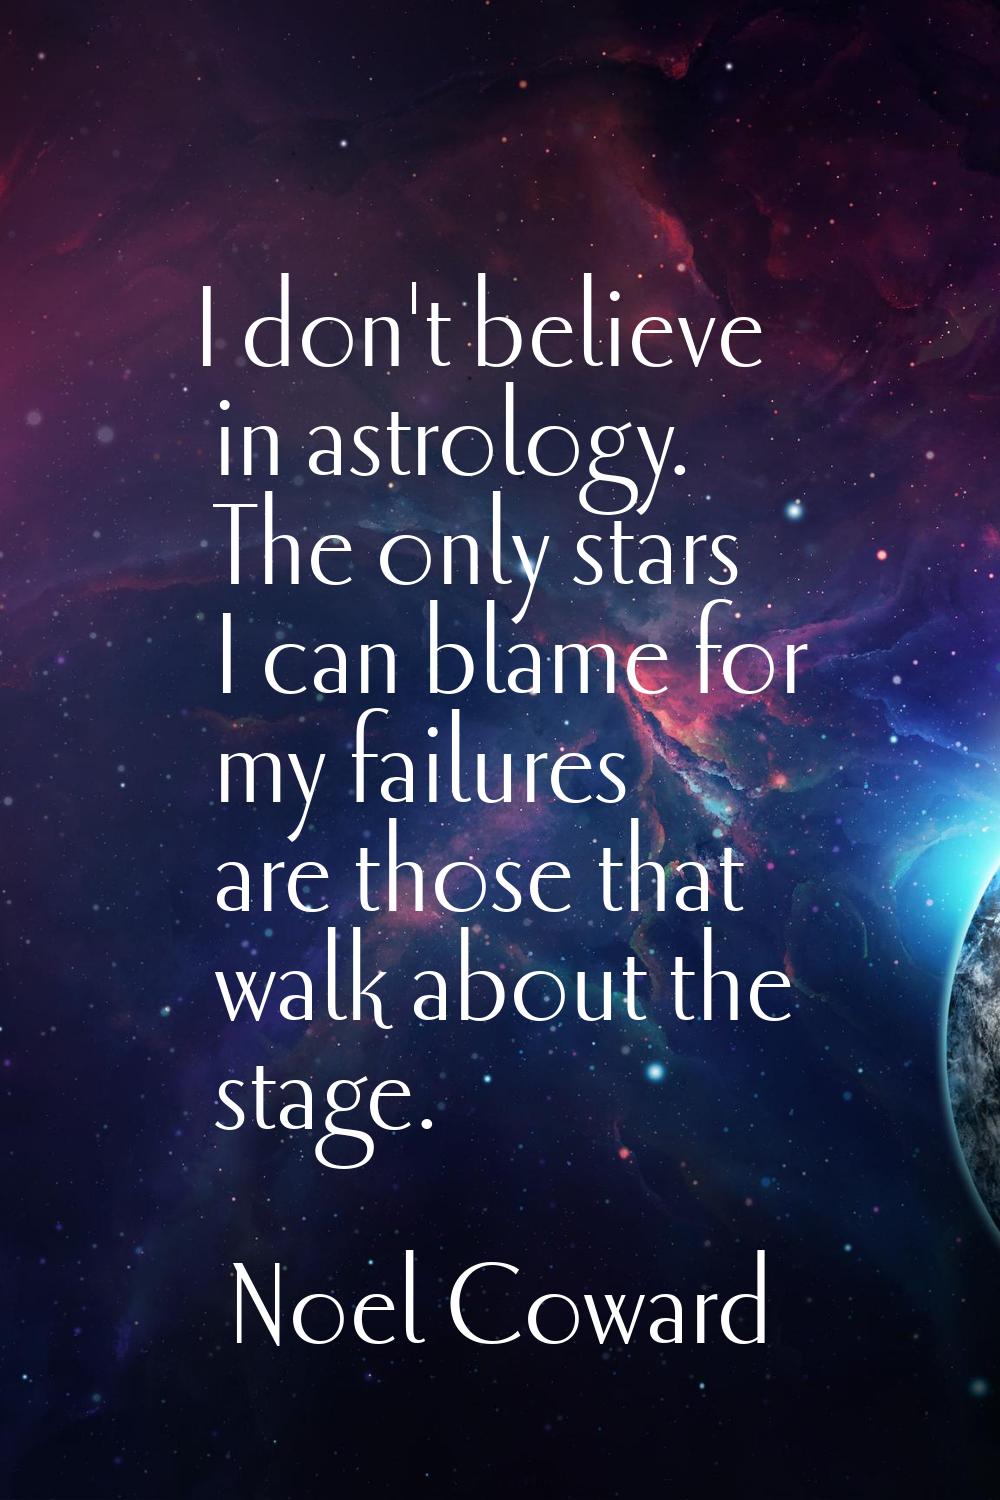 I don't believe in astrology. The only stars I can blame for my failures are those that walk about 